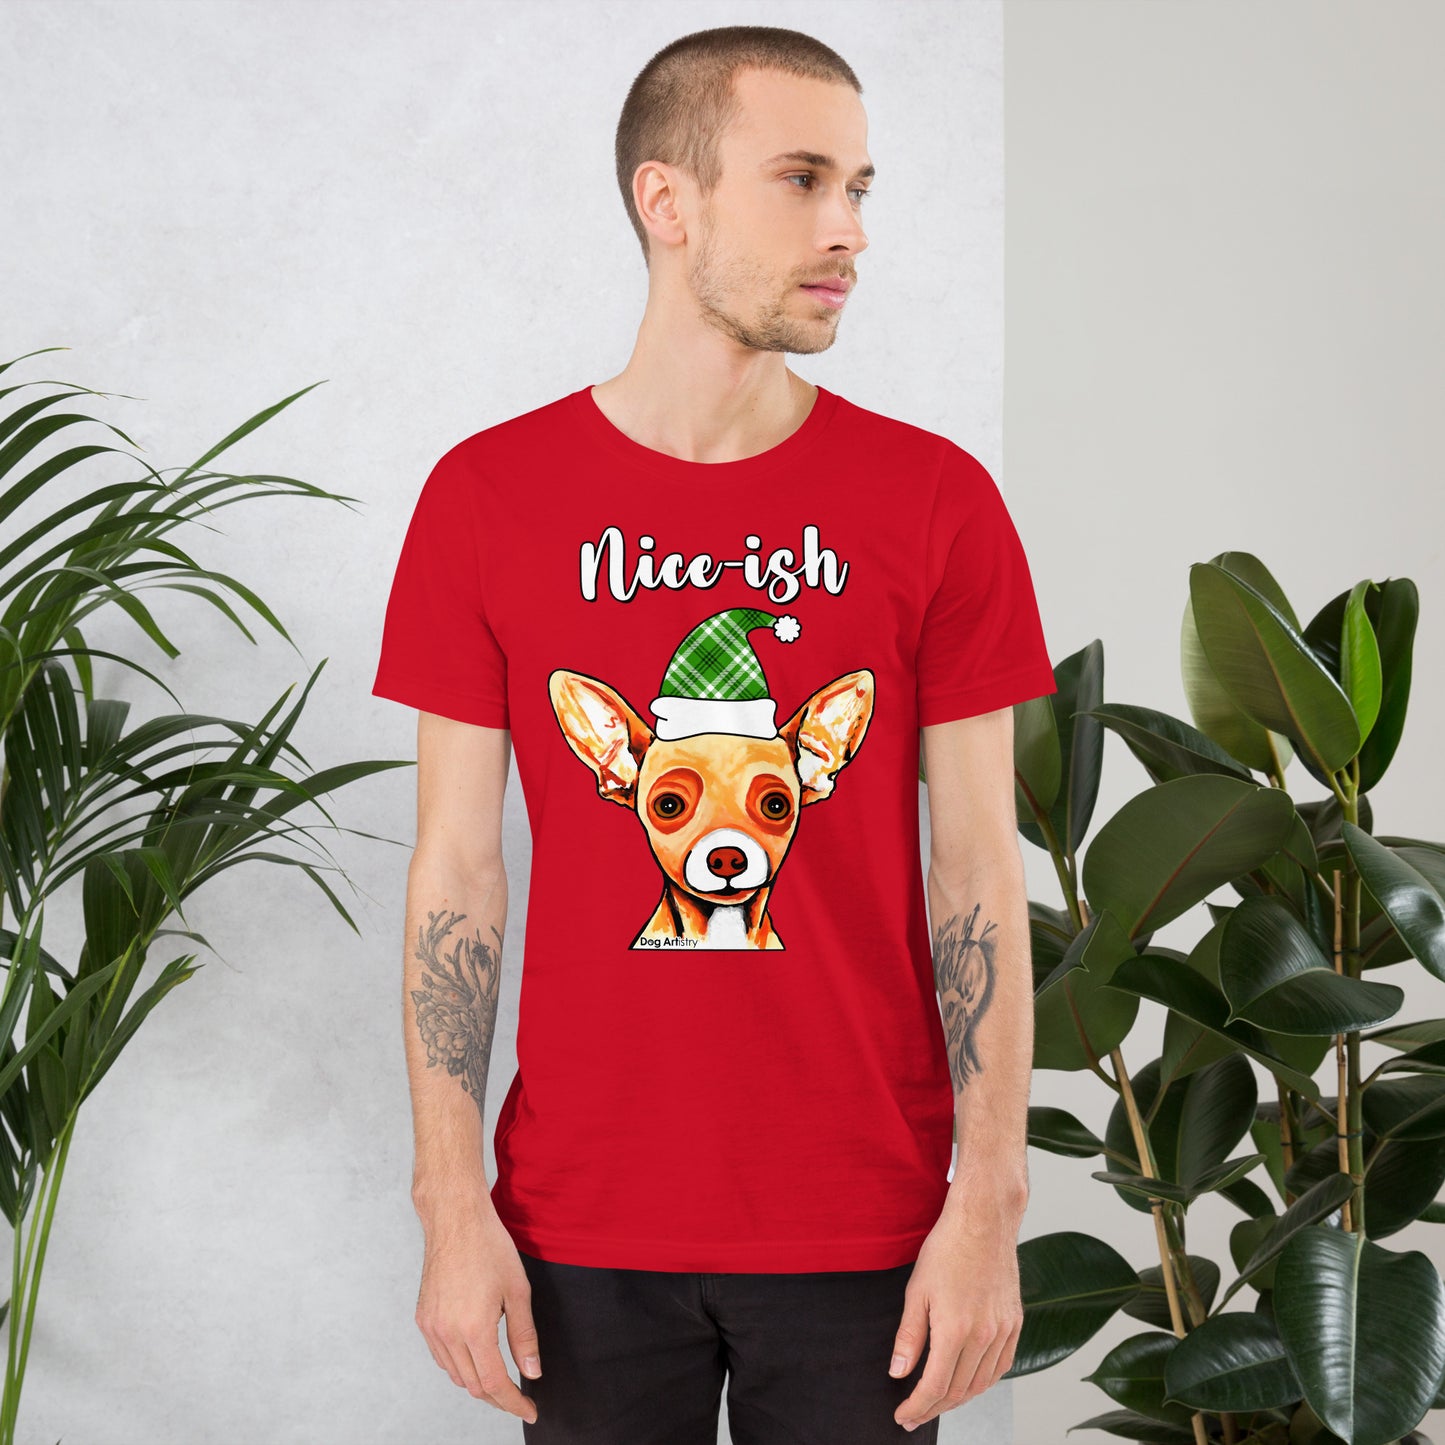 Nice-ish Chihuahua unisex t-shirt red by Dog Artistry.